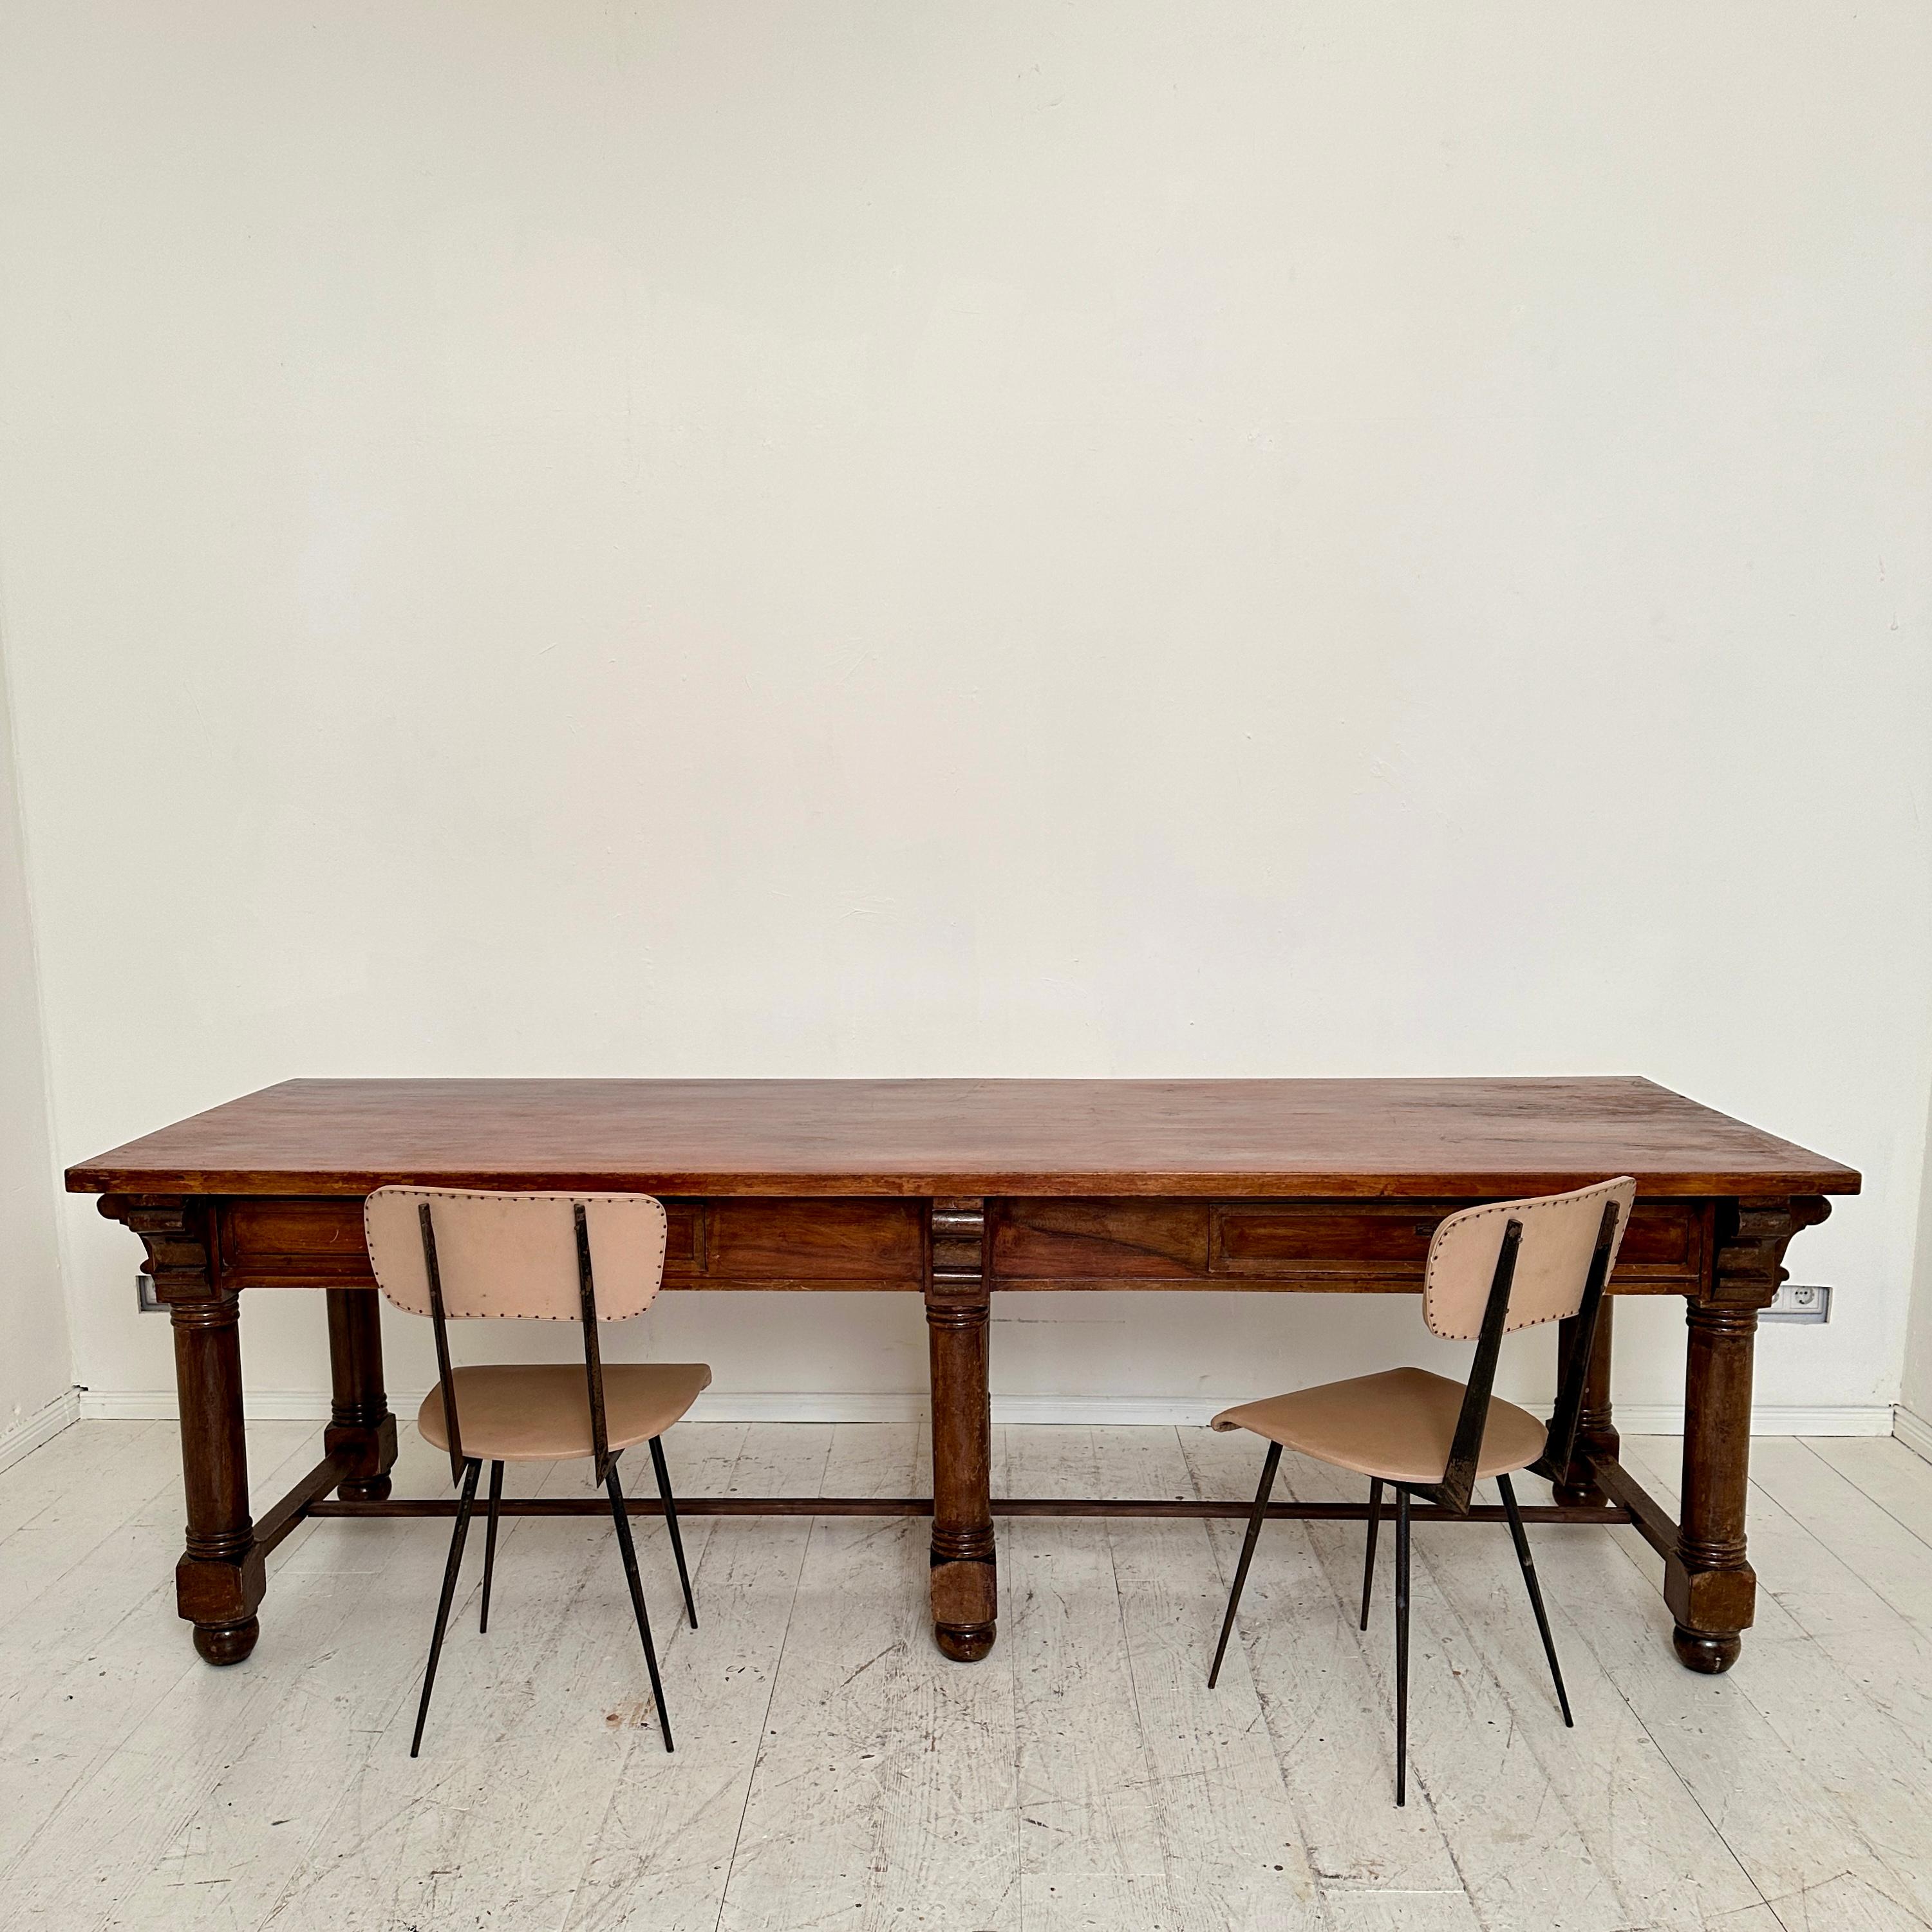 Late 19th Century Italian Large Brown Walnut Dining Table with 2 Drawers, 1880 For Sale 7